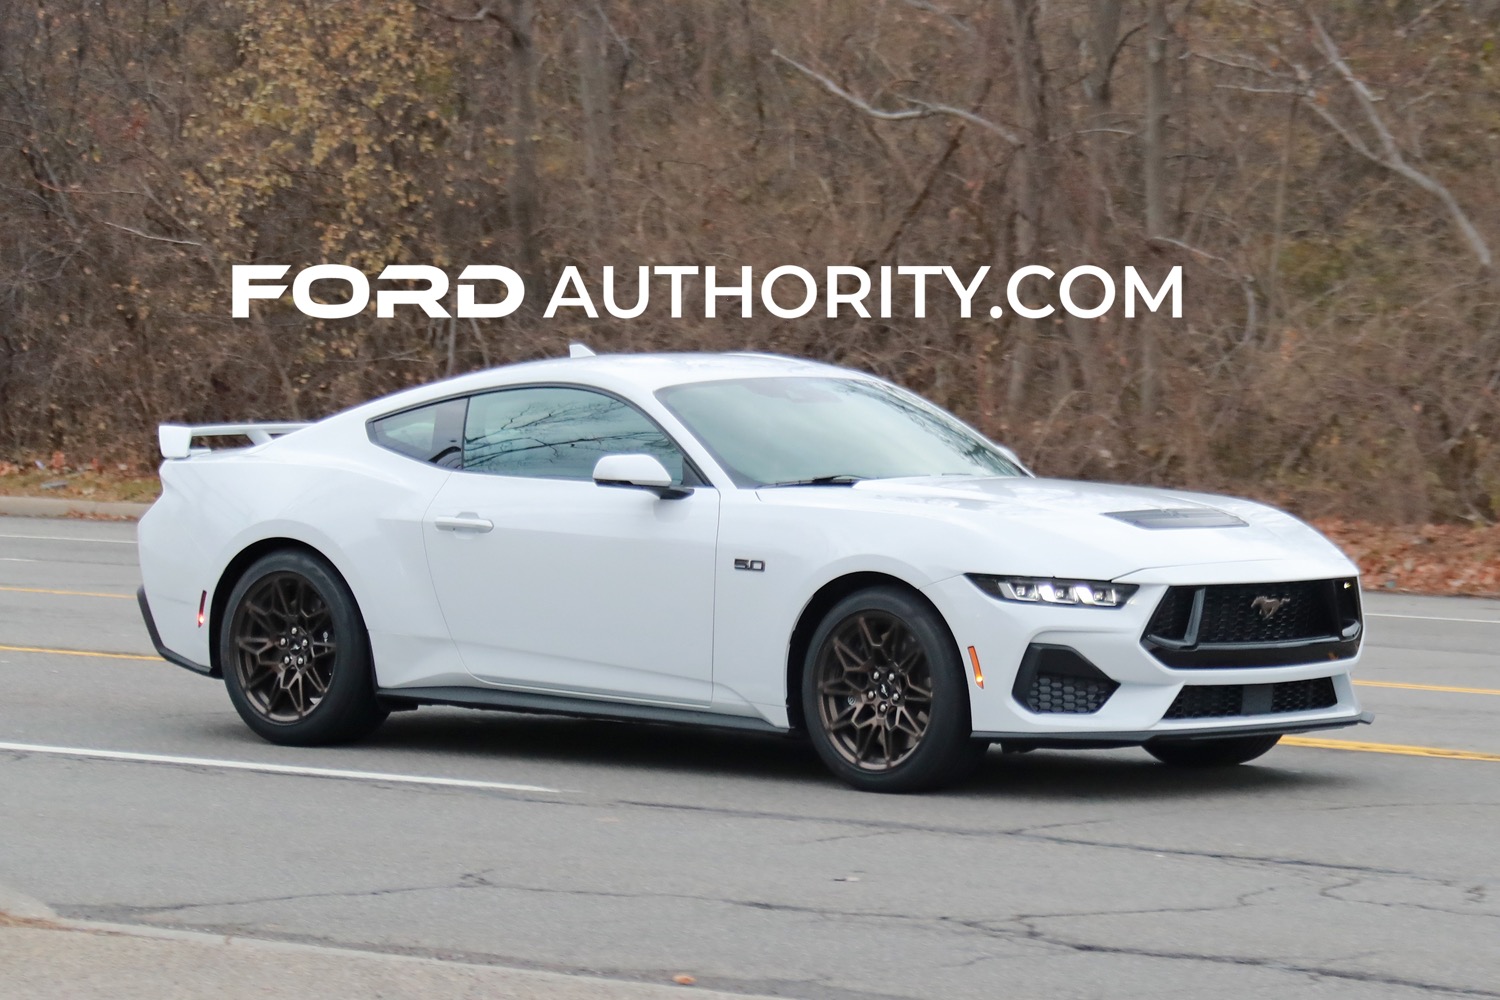 Ford Mustang Images  Mustang Exterior, Road Test and Interior Photo Gallery